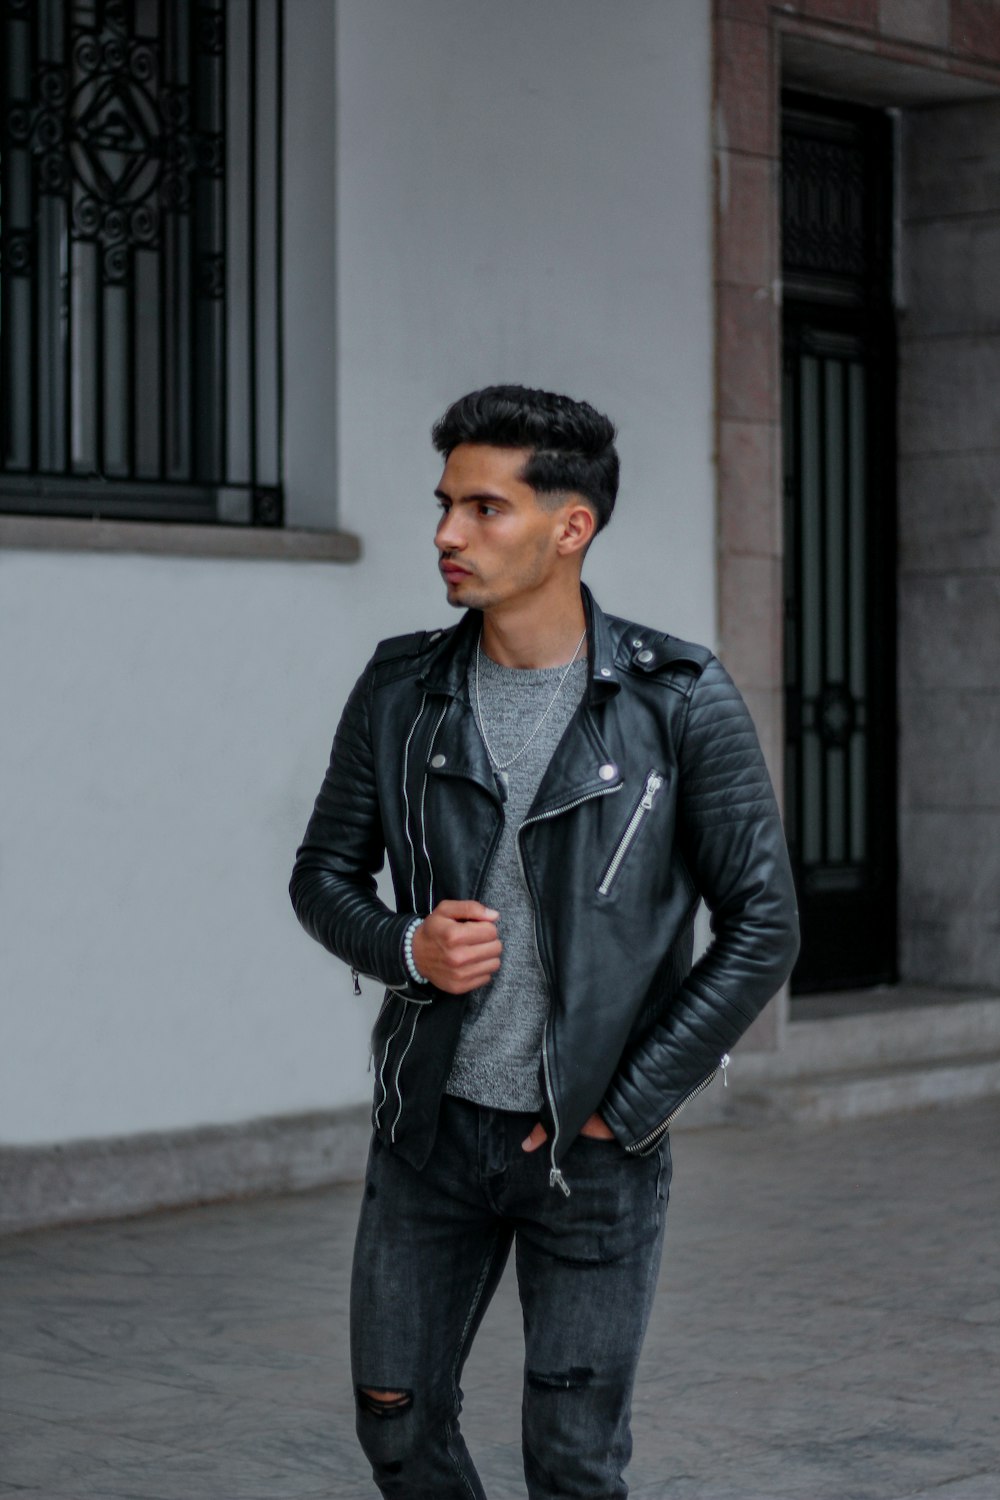 Man in black leather jacket standing near white wall during daytime photo –  Free Maroc Image on Unsplash